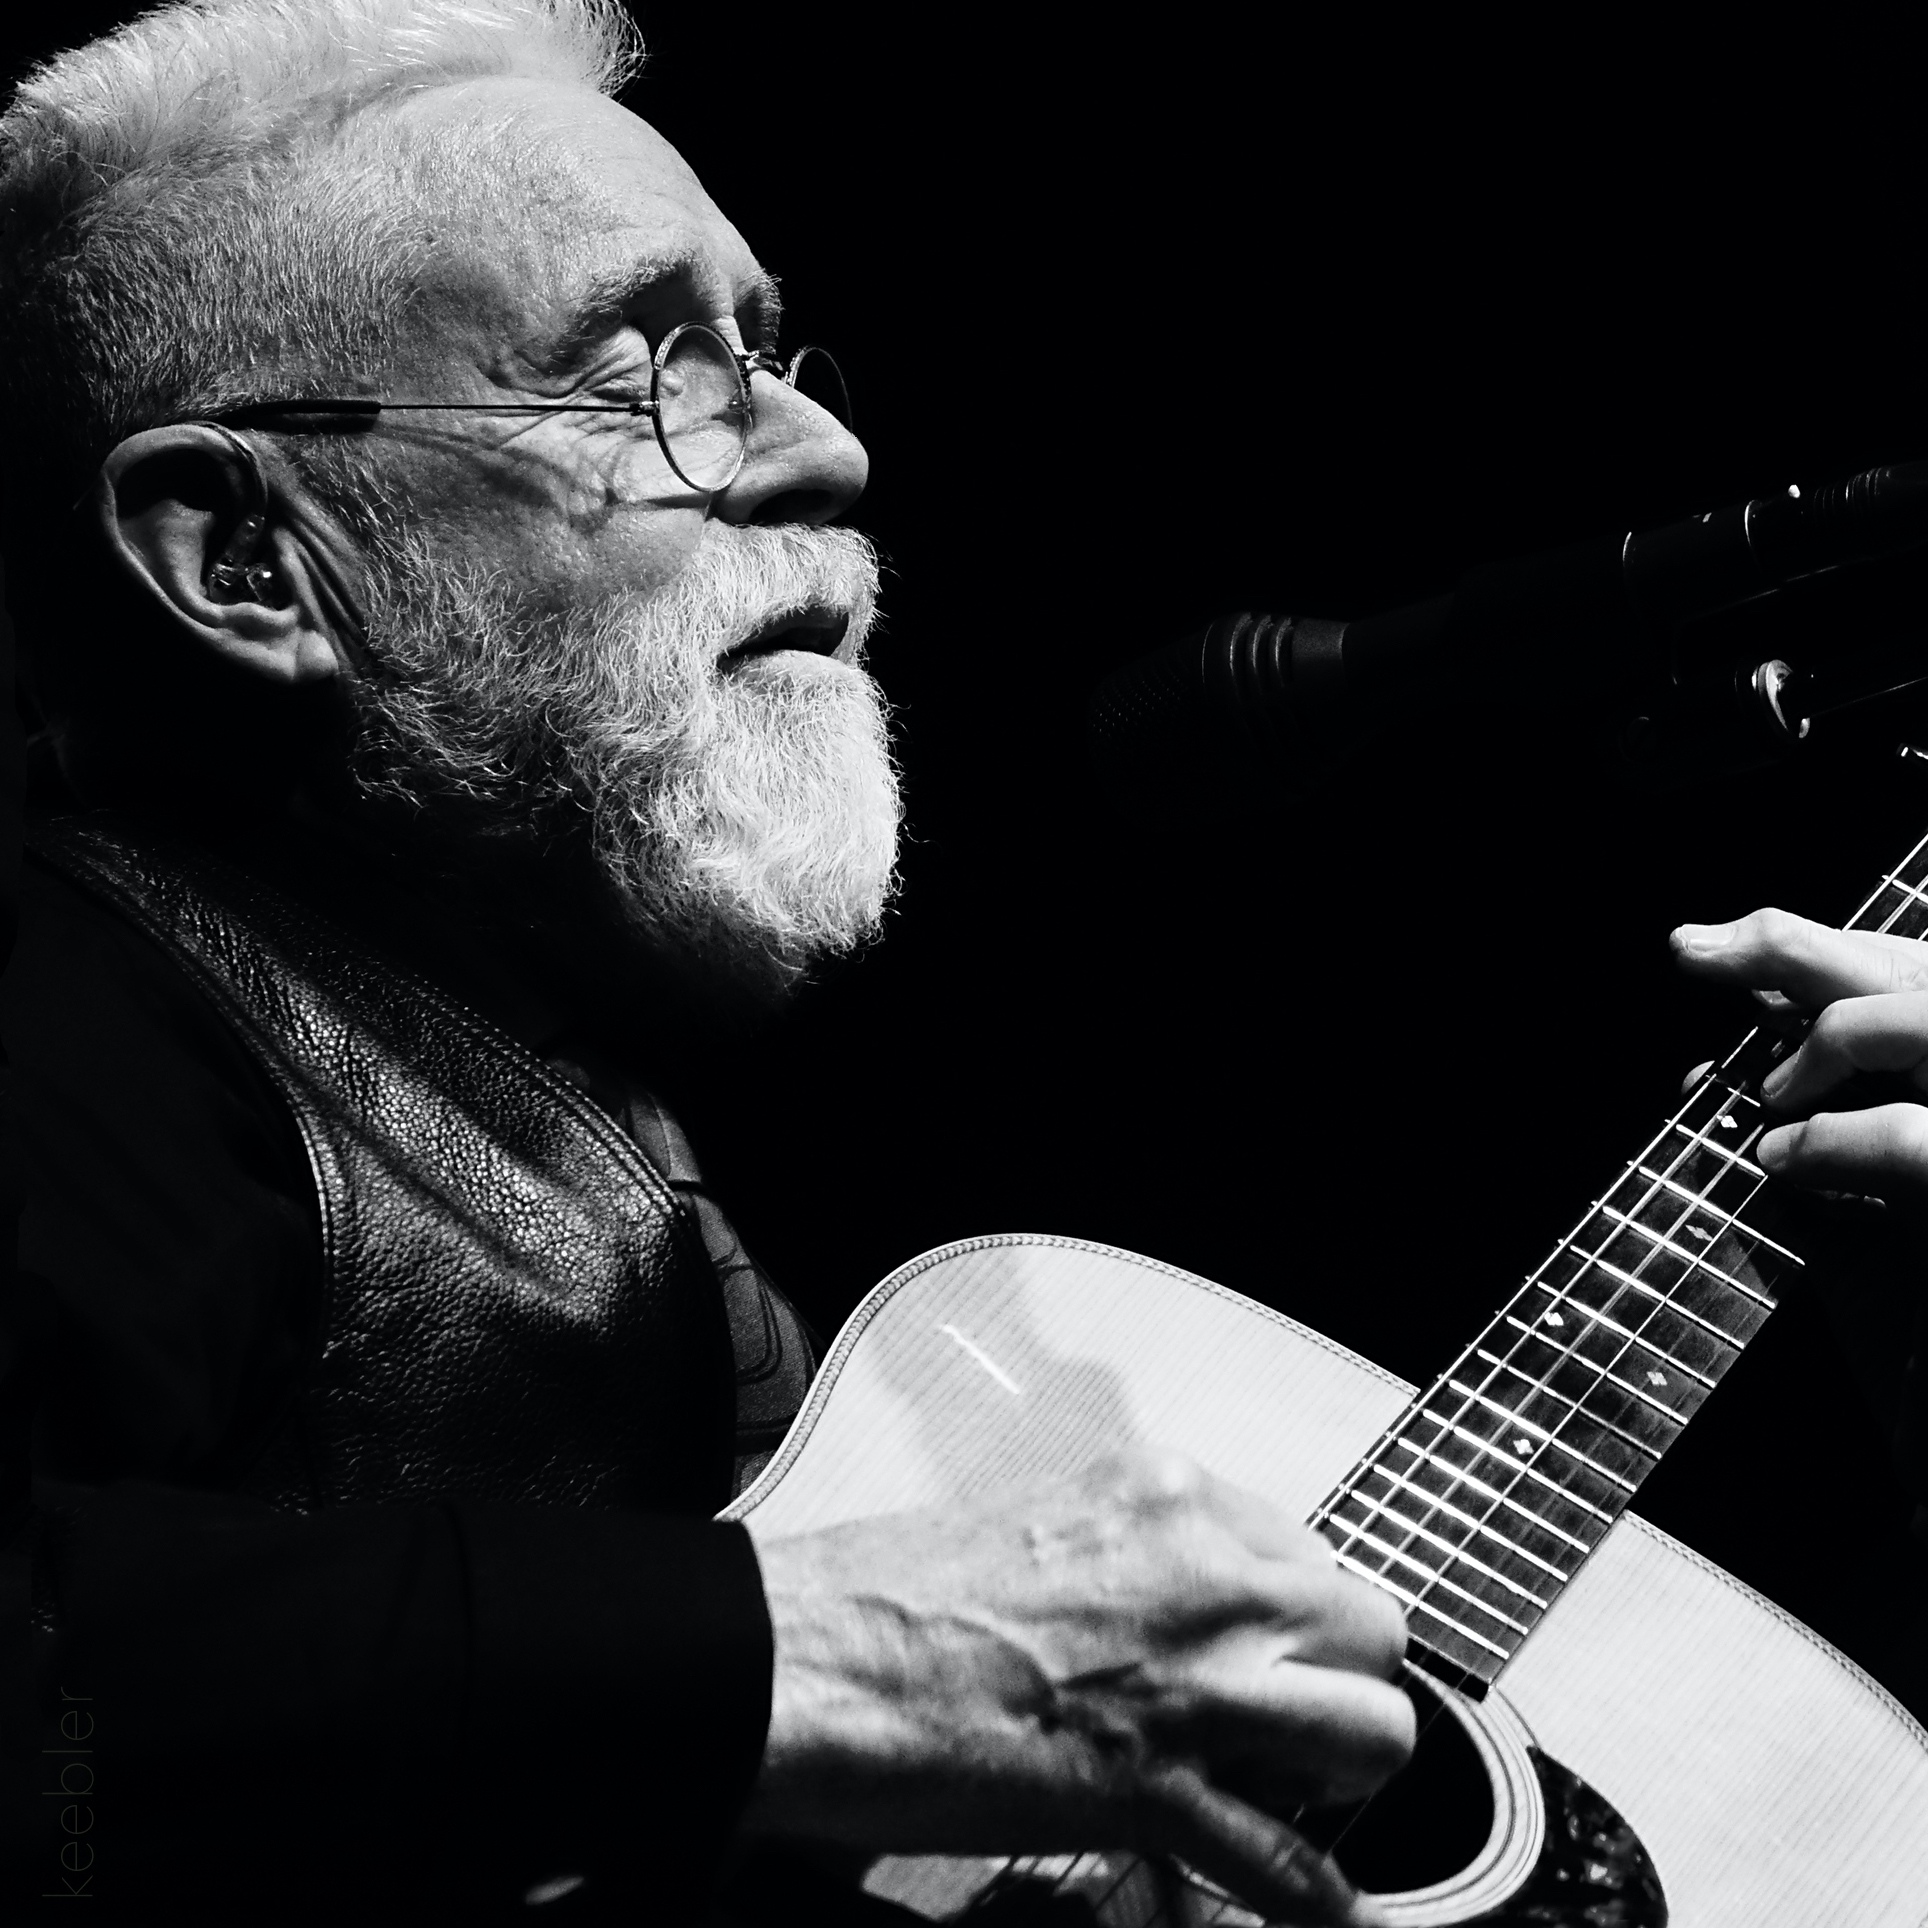 Bruce Cockburn playing guitar in a black and white photo.